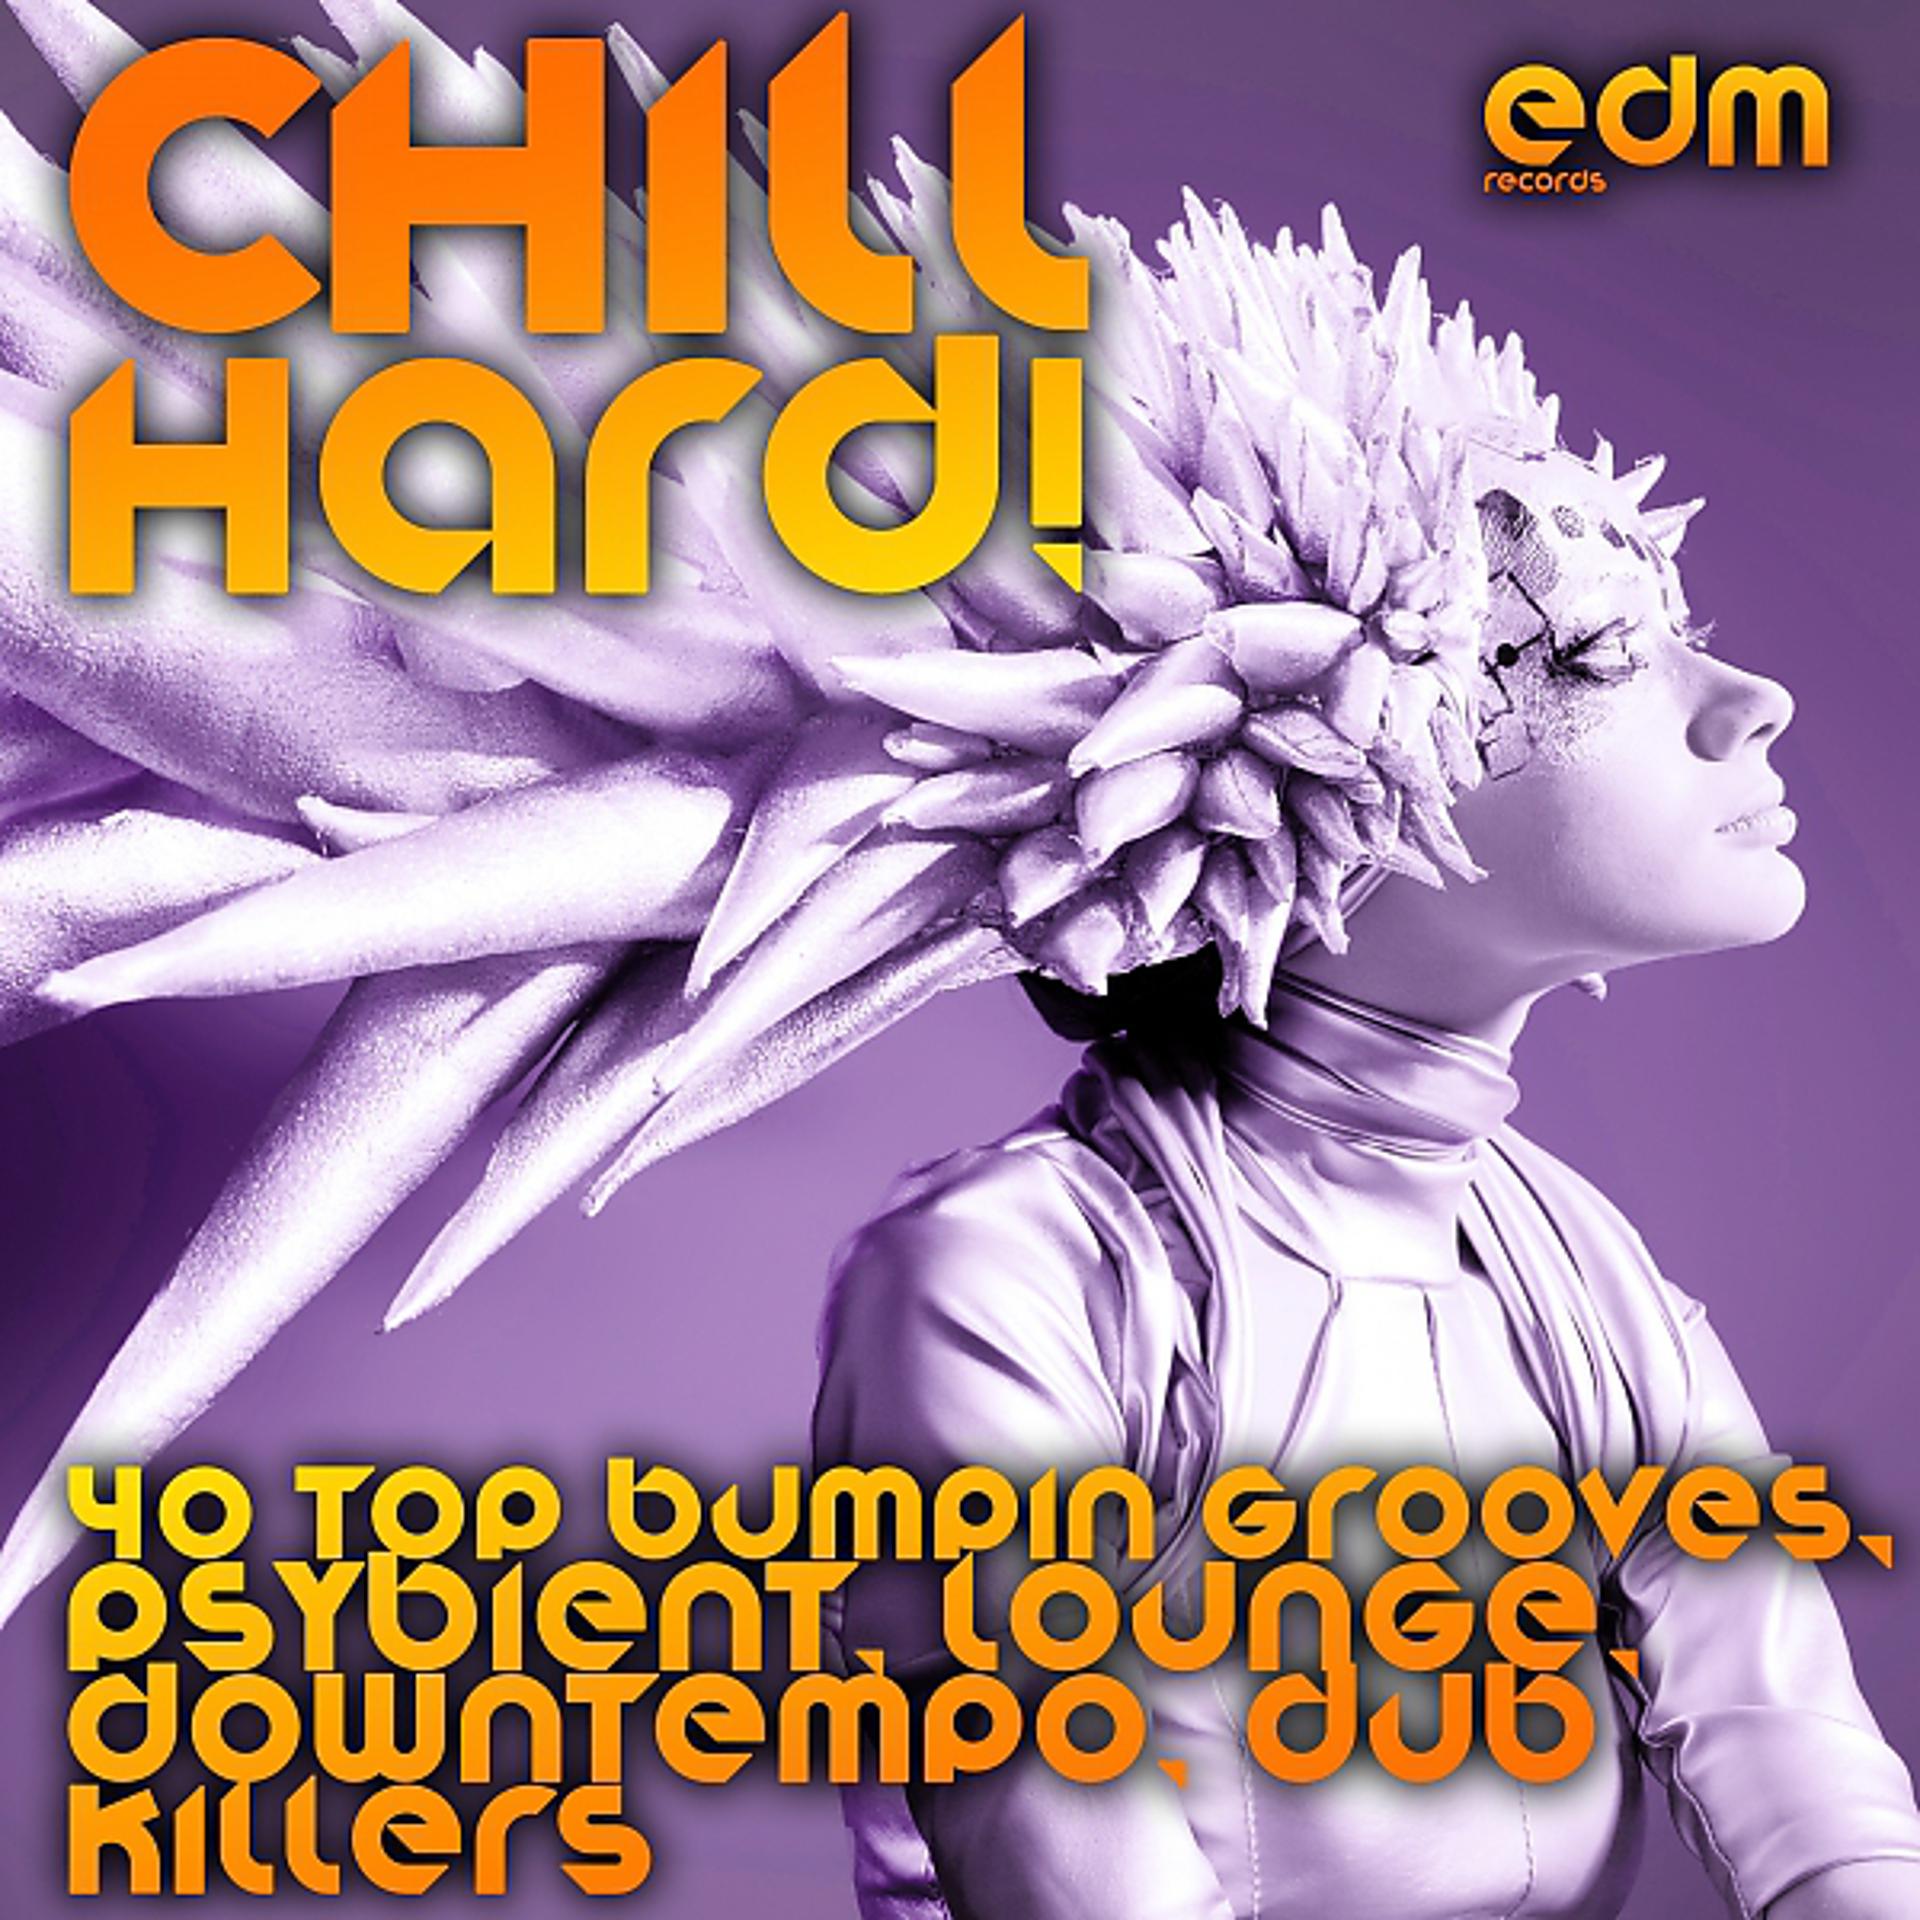 Постер альбома Chill Hard! (40 Top Bumpin Grooves, Psybient, Lounge, Downtempo, Dub Killers)